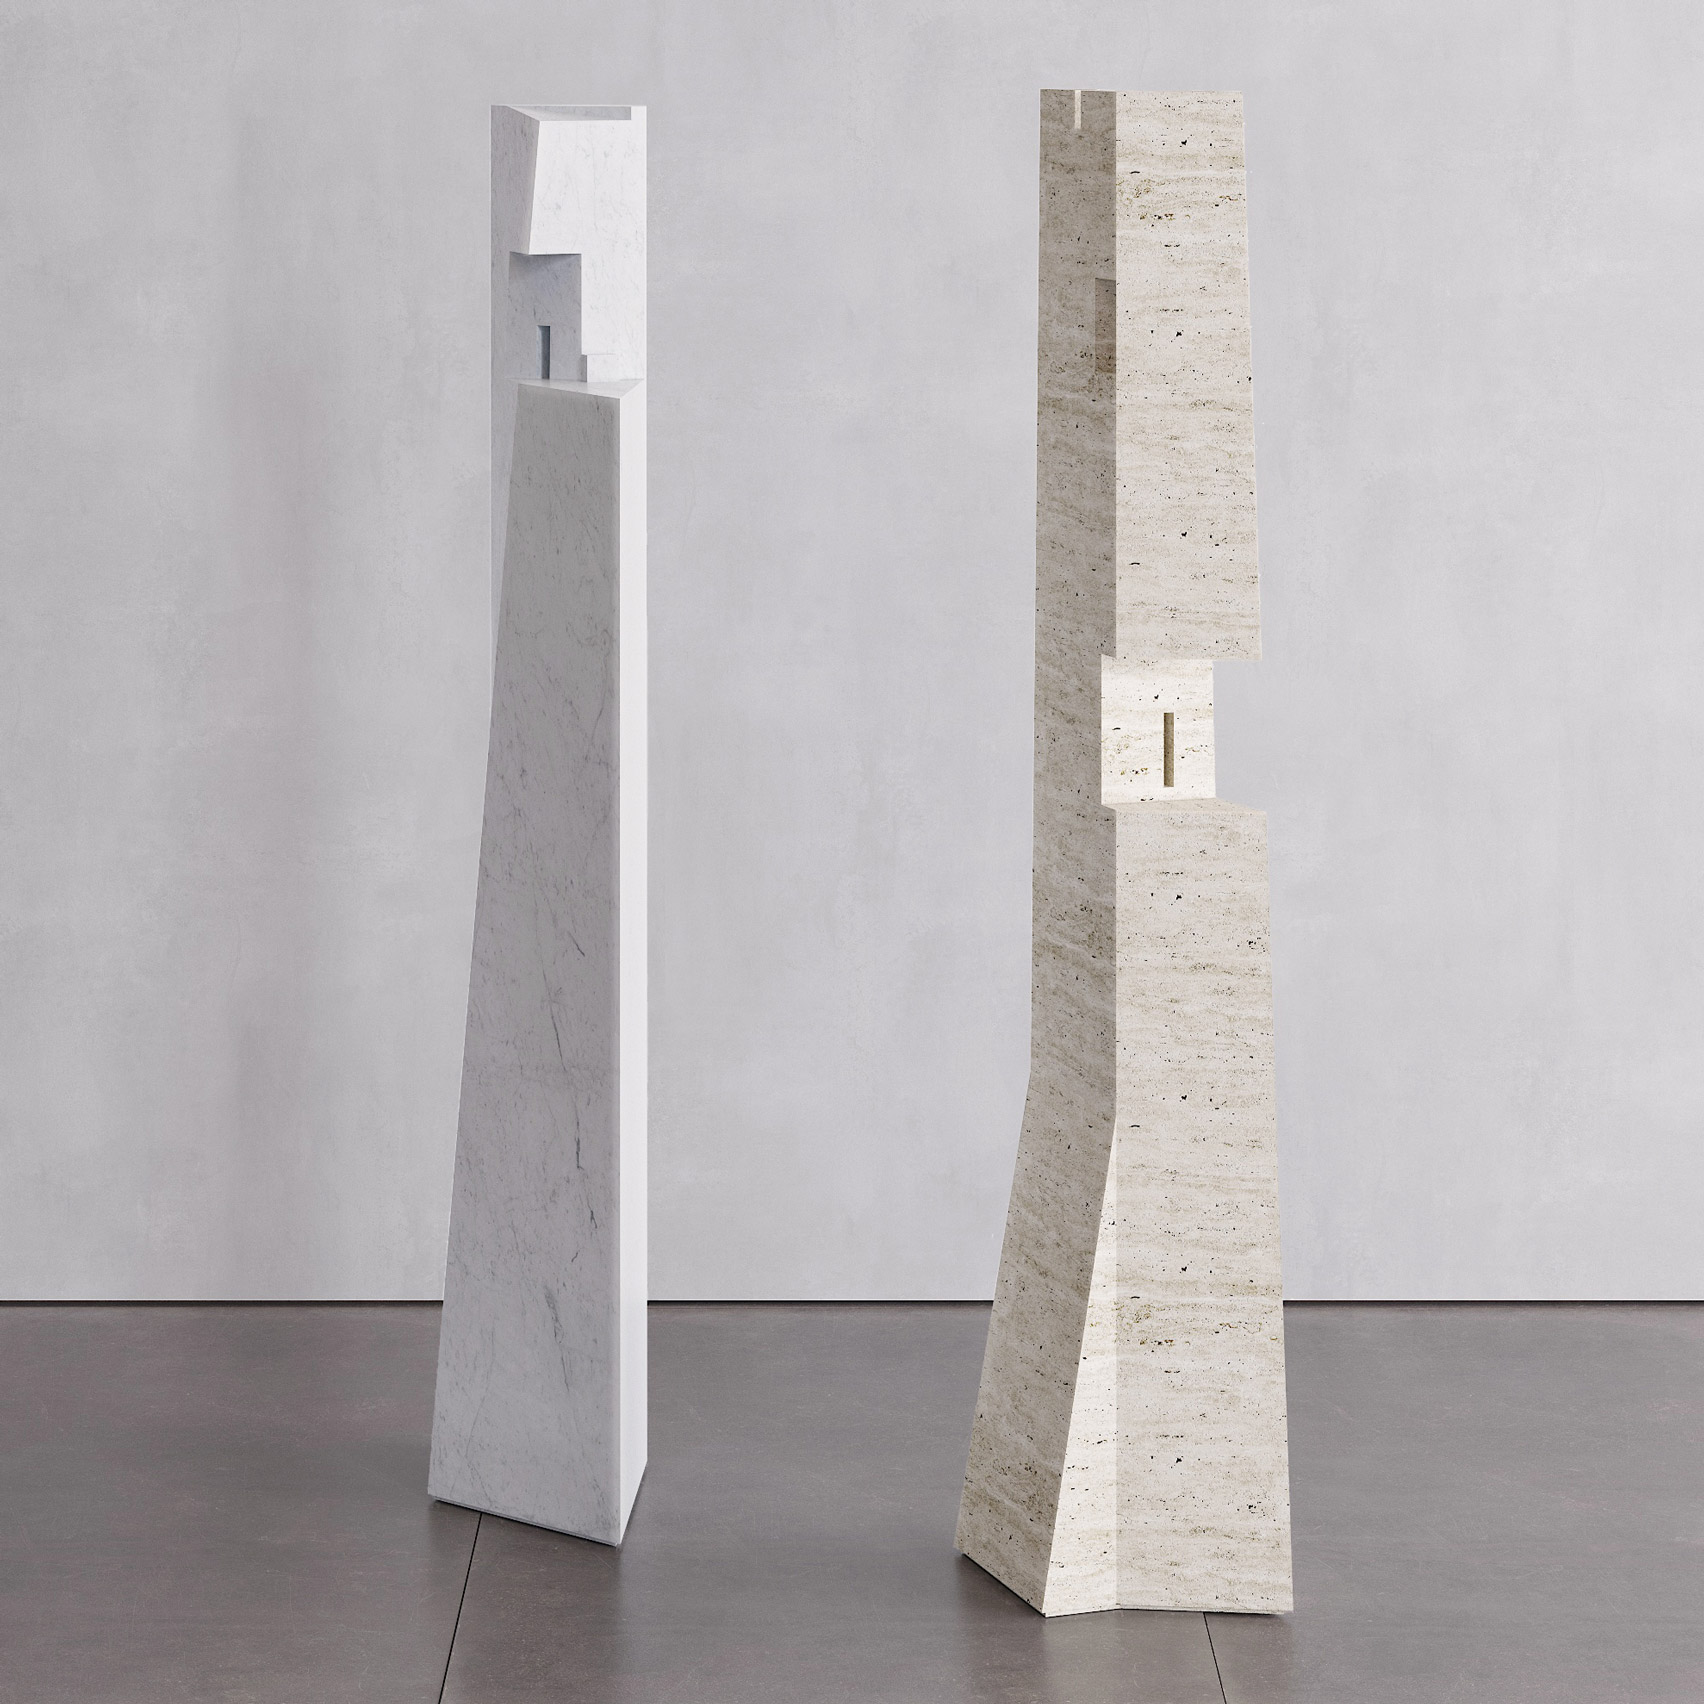 Two totemic pole sculptures at Lake Como Design Festival